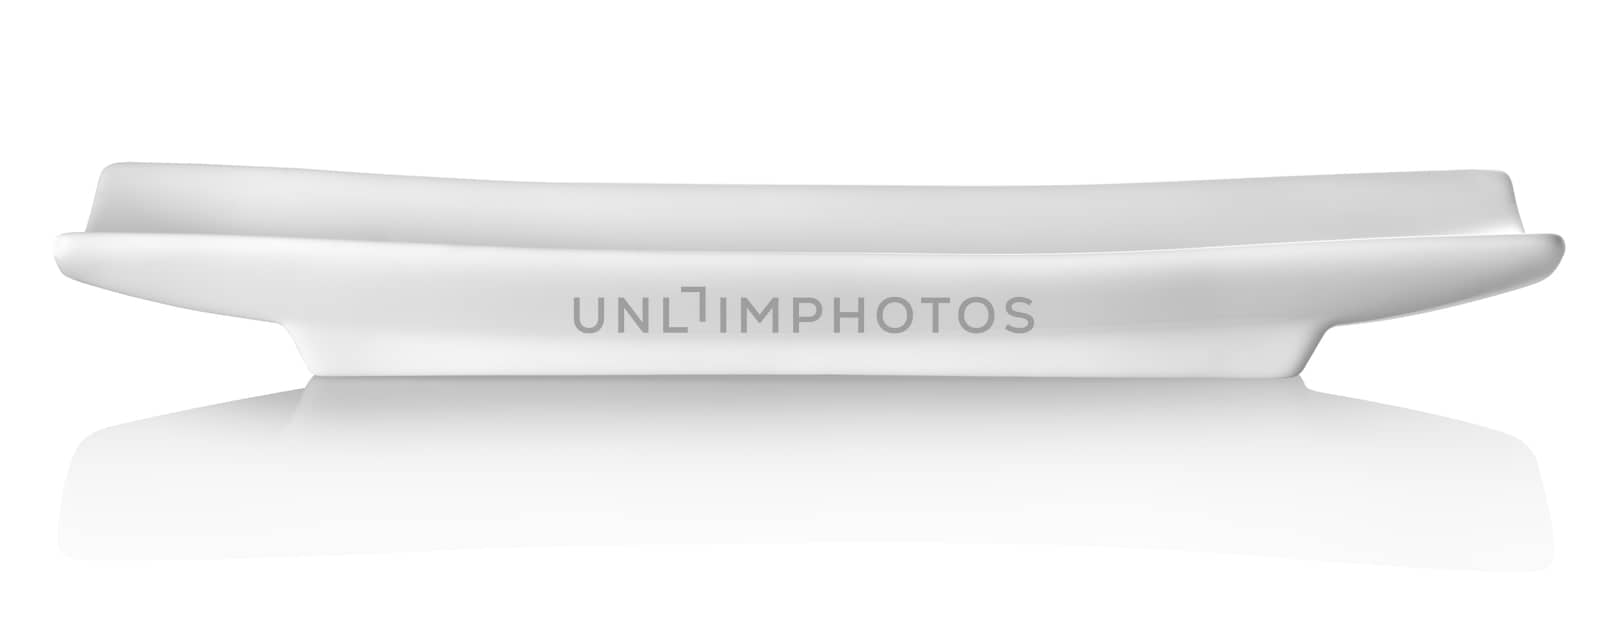 White rectangular plate isolated on a white background